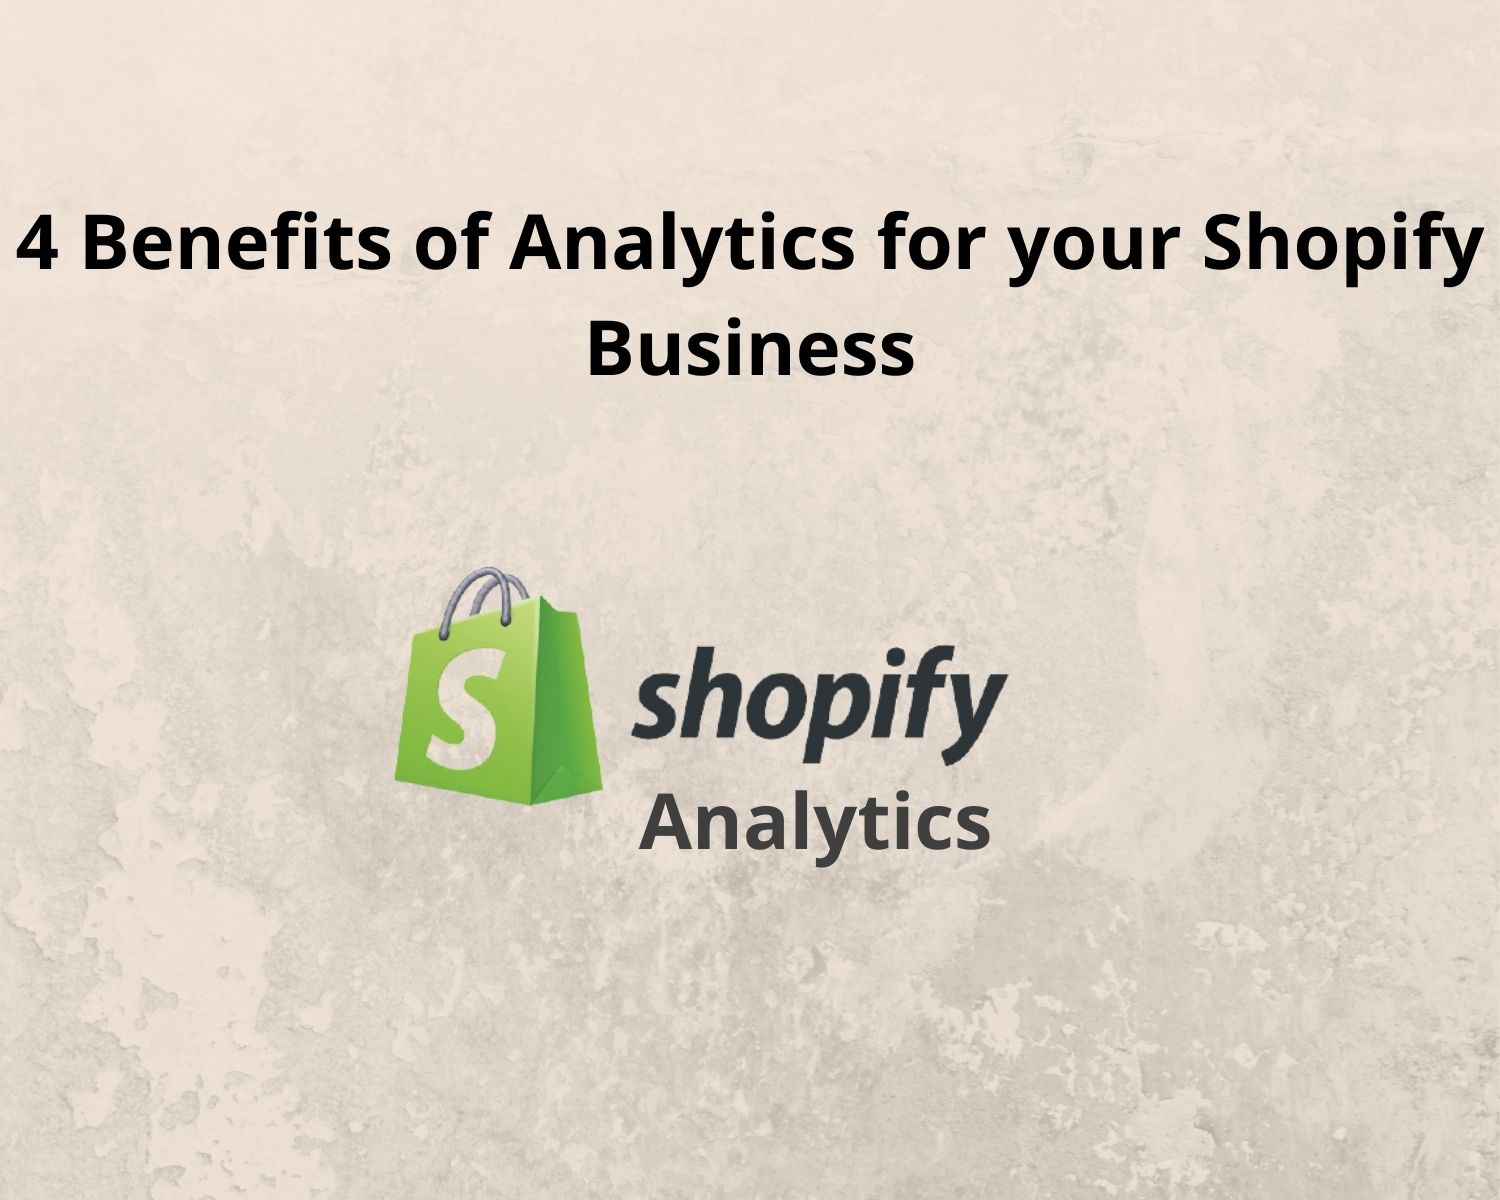 4 Benefits of Analytics for your Shopify Business